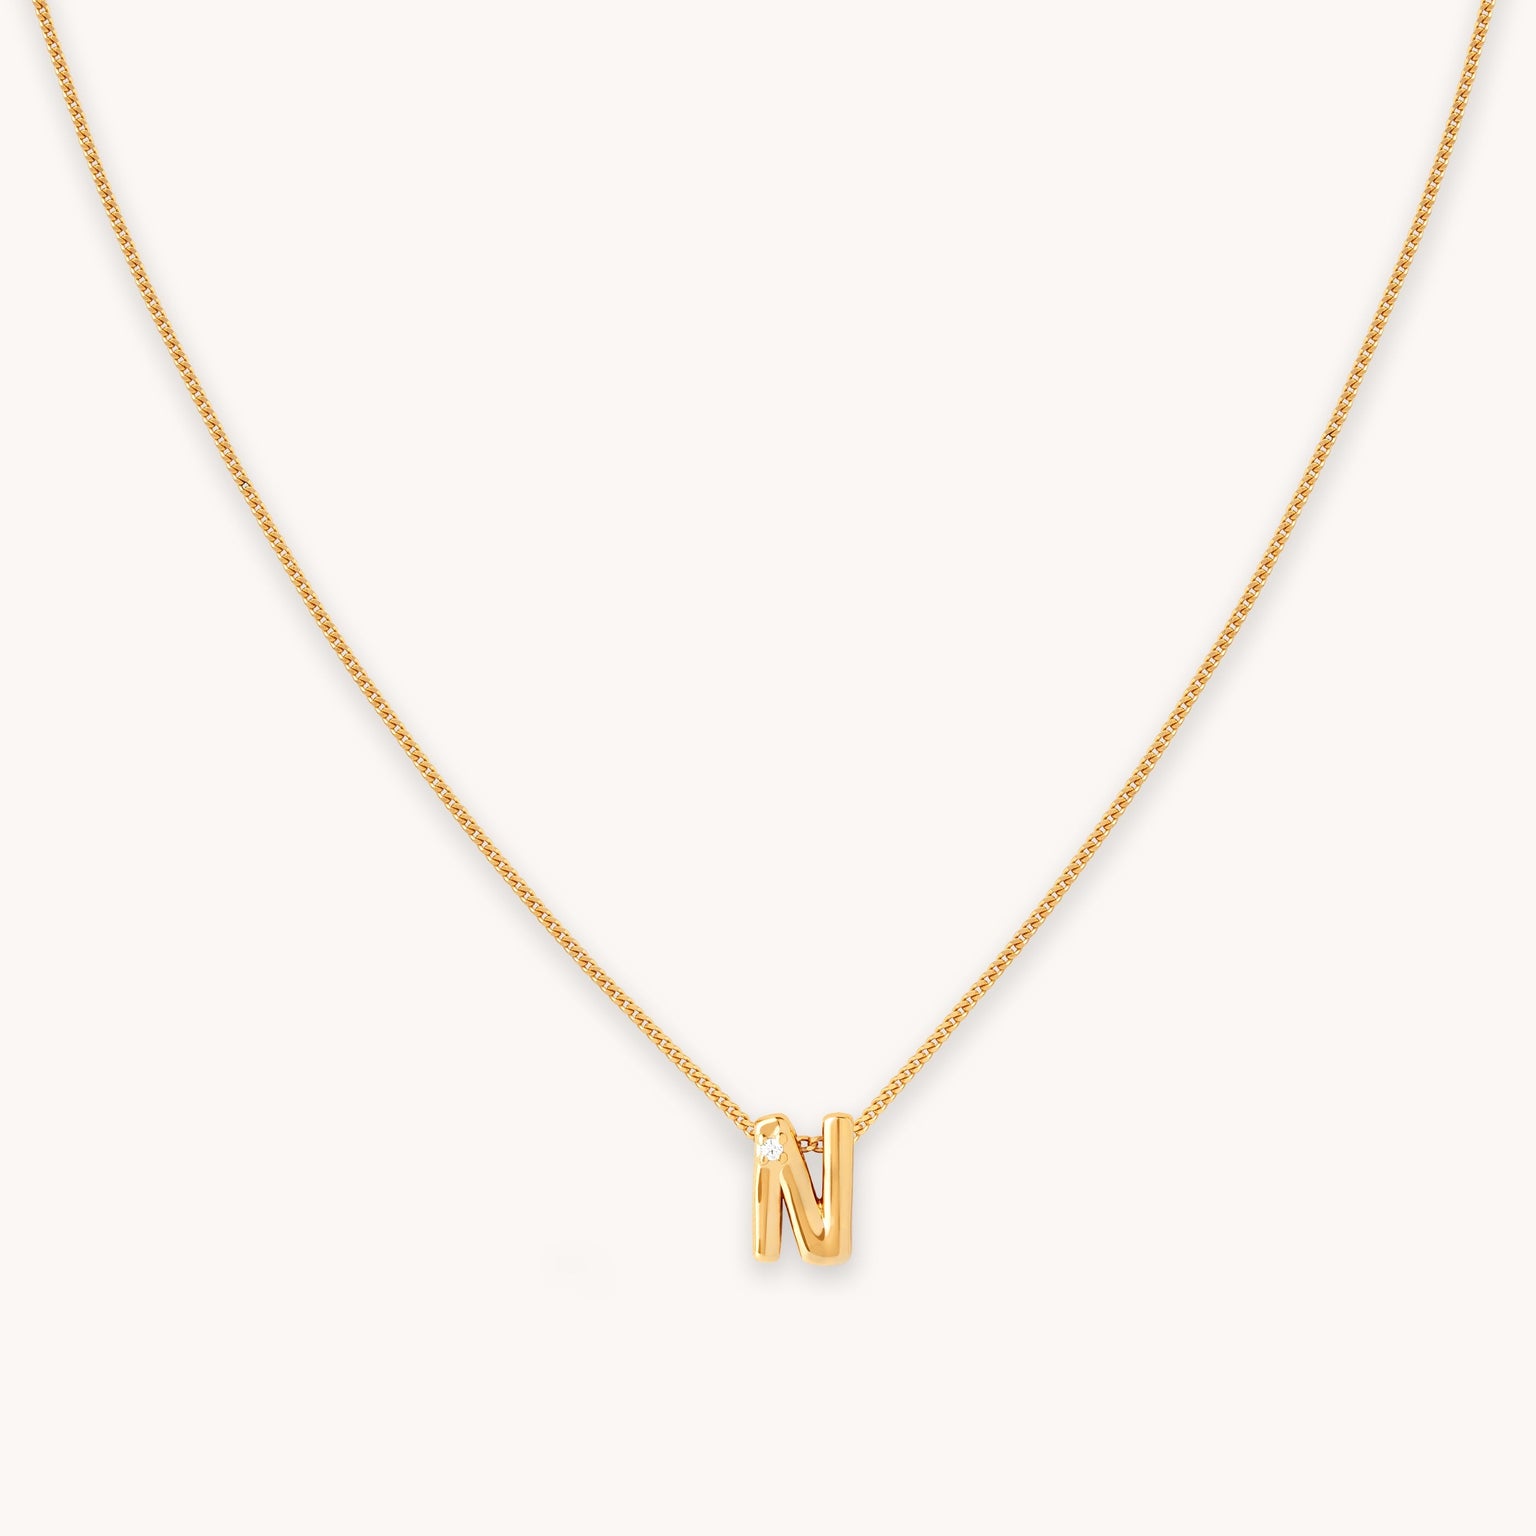 N Initial Pendant Necklace in Gold